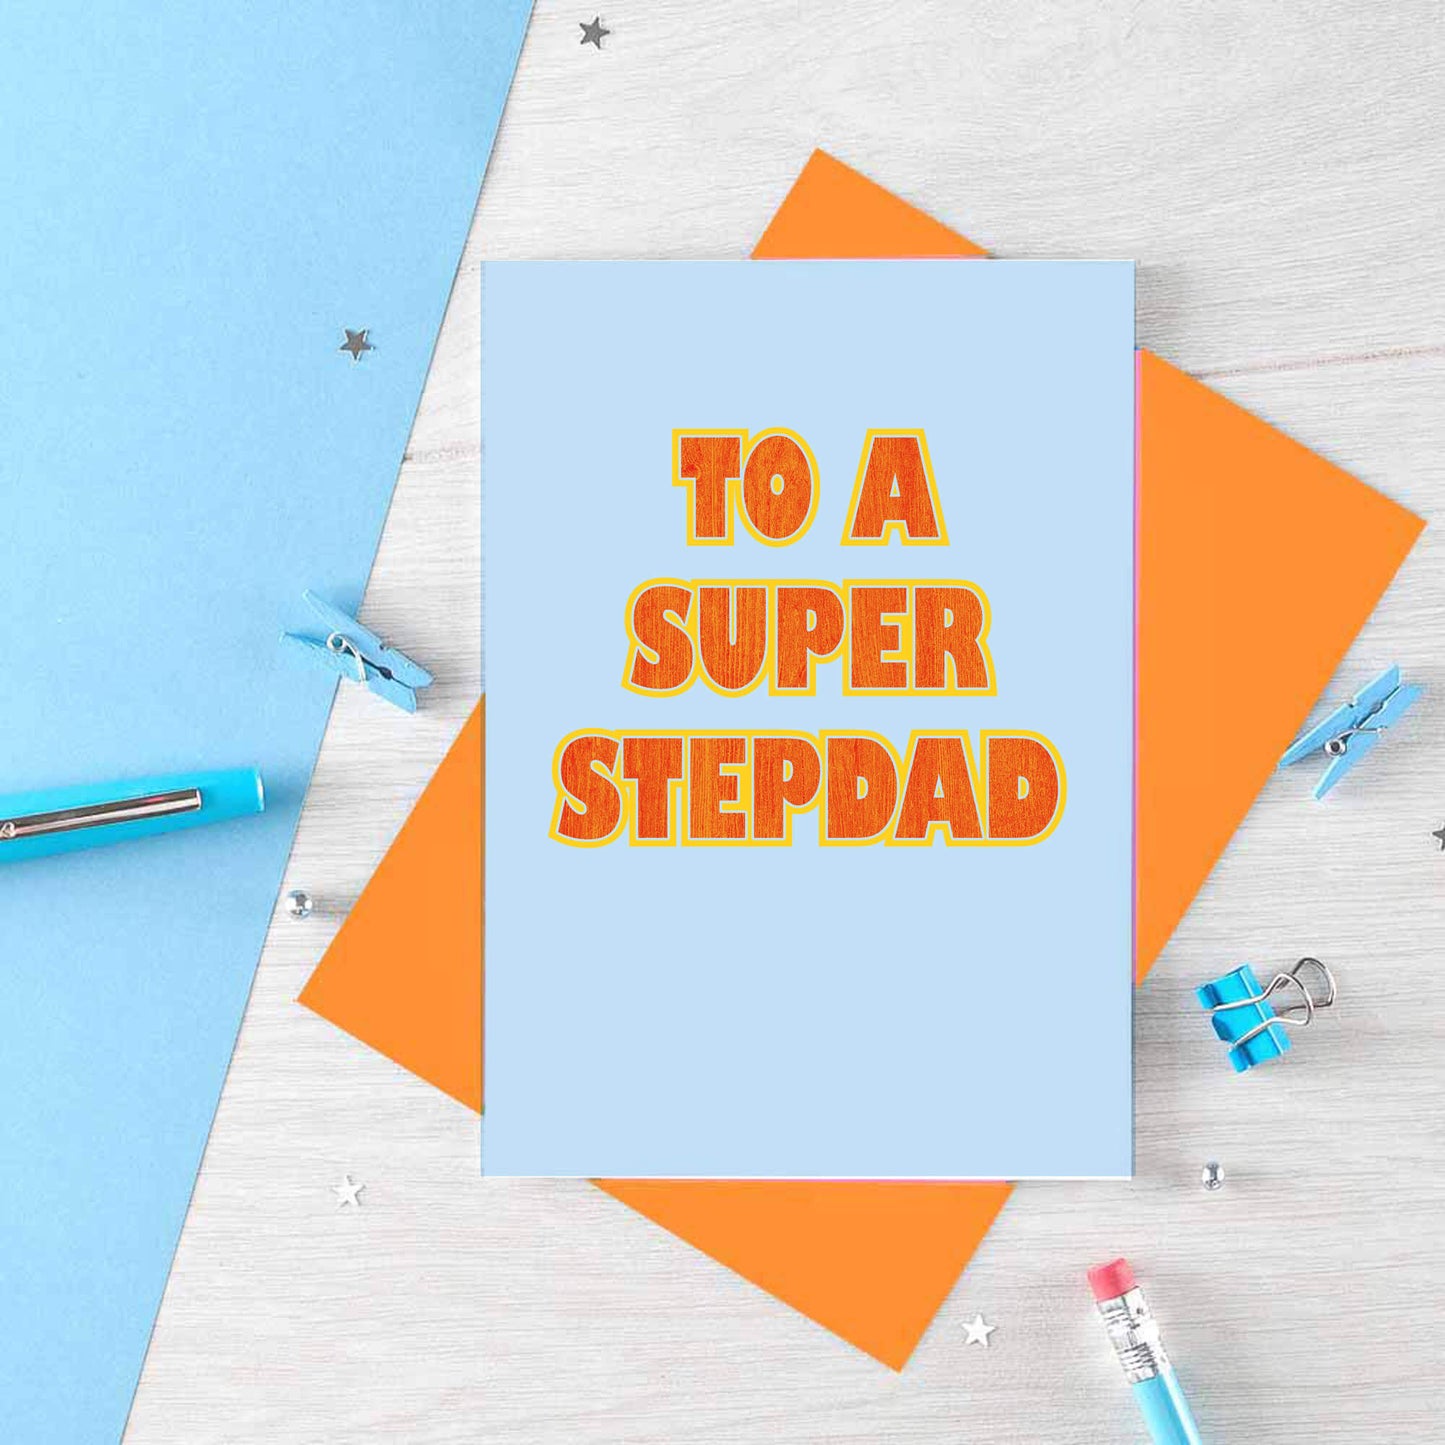 To A Super Stepdad Card by SixElevenCreations. Product Code SE1501A6